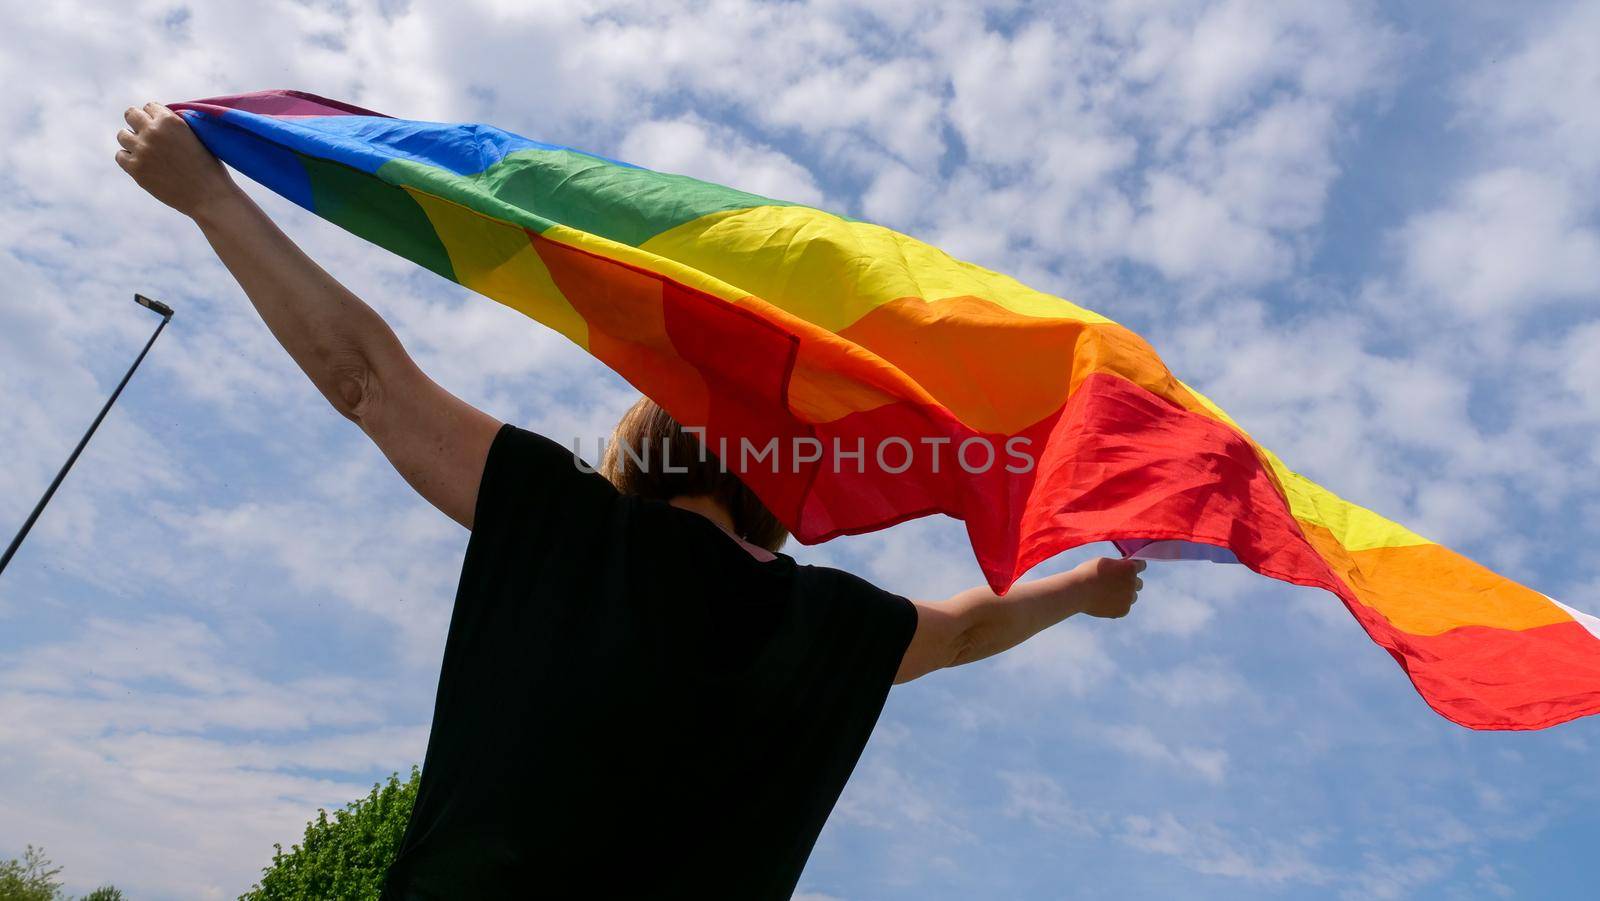 LGBT pride, rainbow peace flag against blue sky with clouds on a sunny day and Celebrate Bisexuality Day or National Coming Out Day